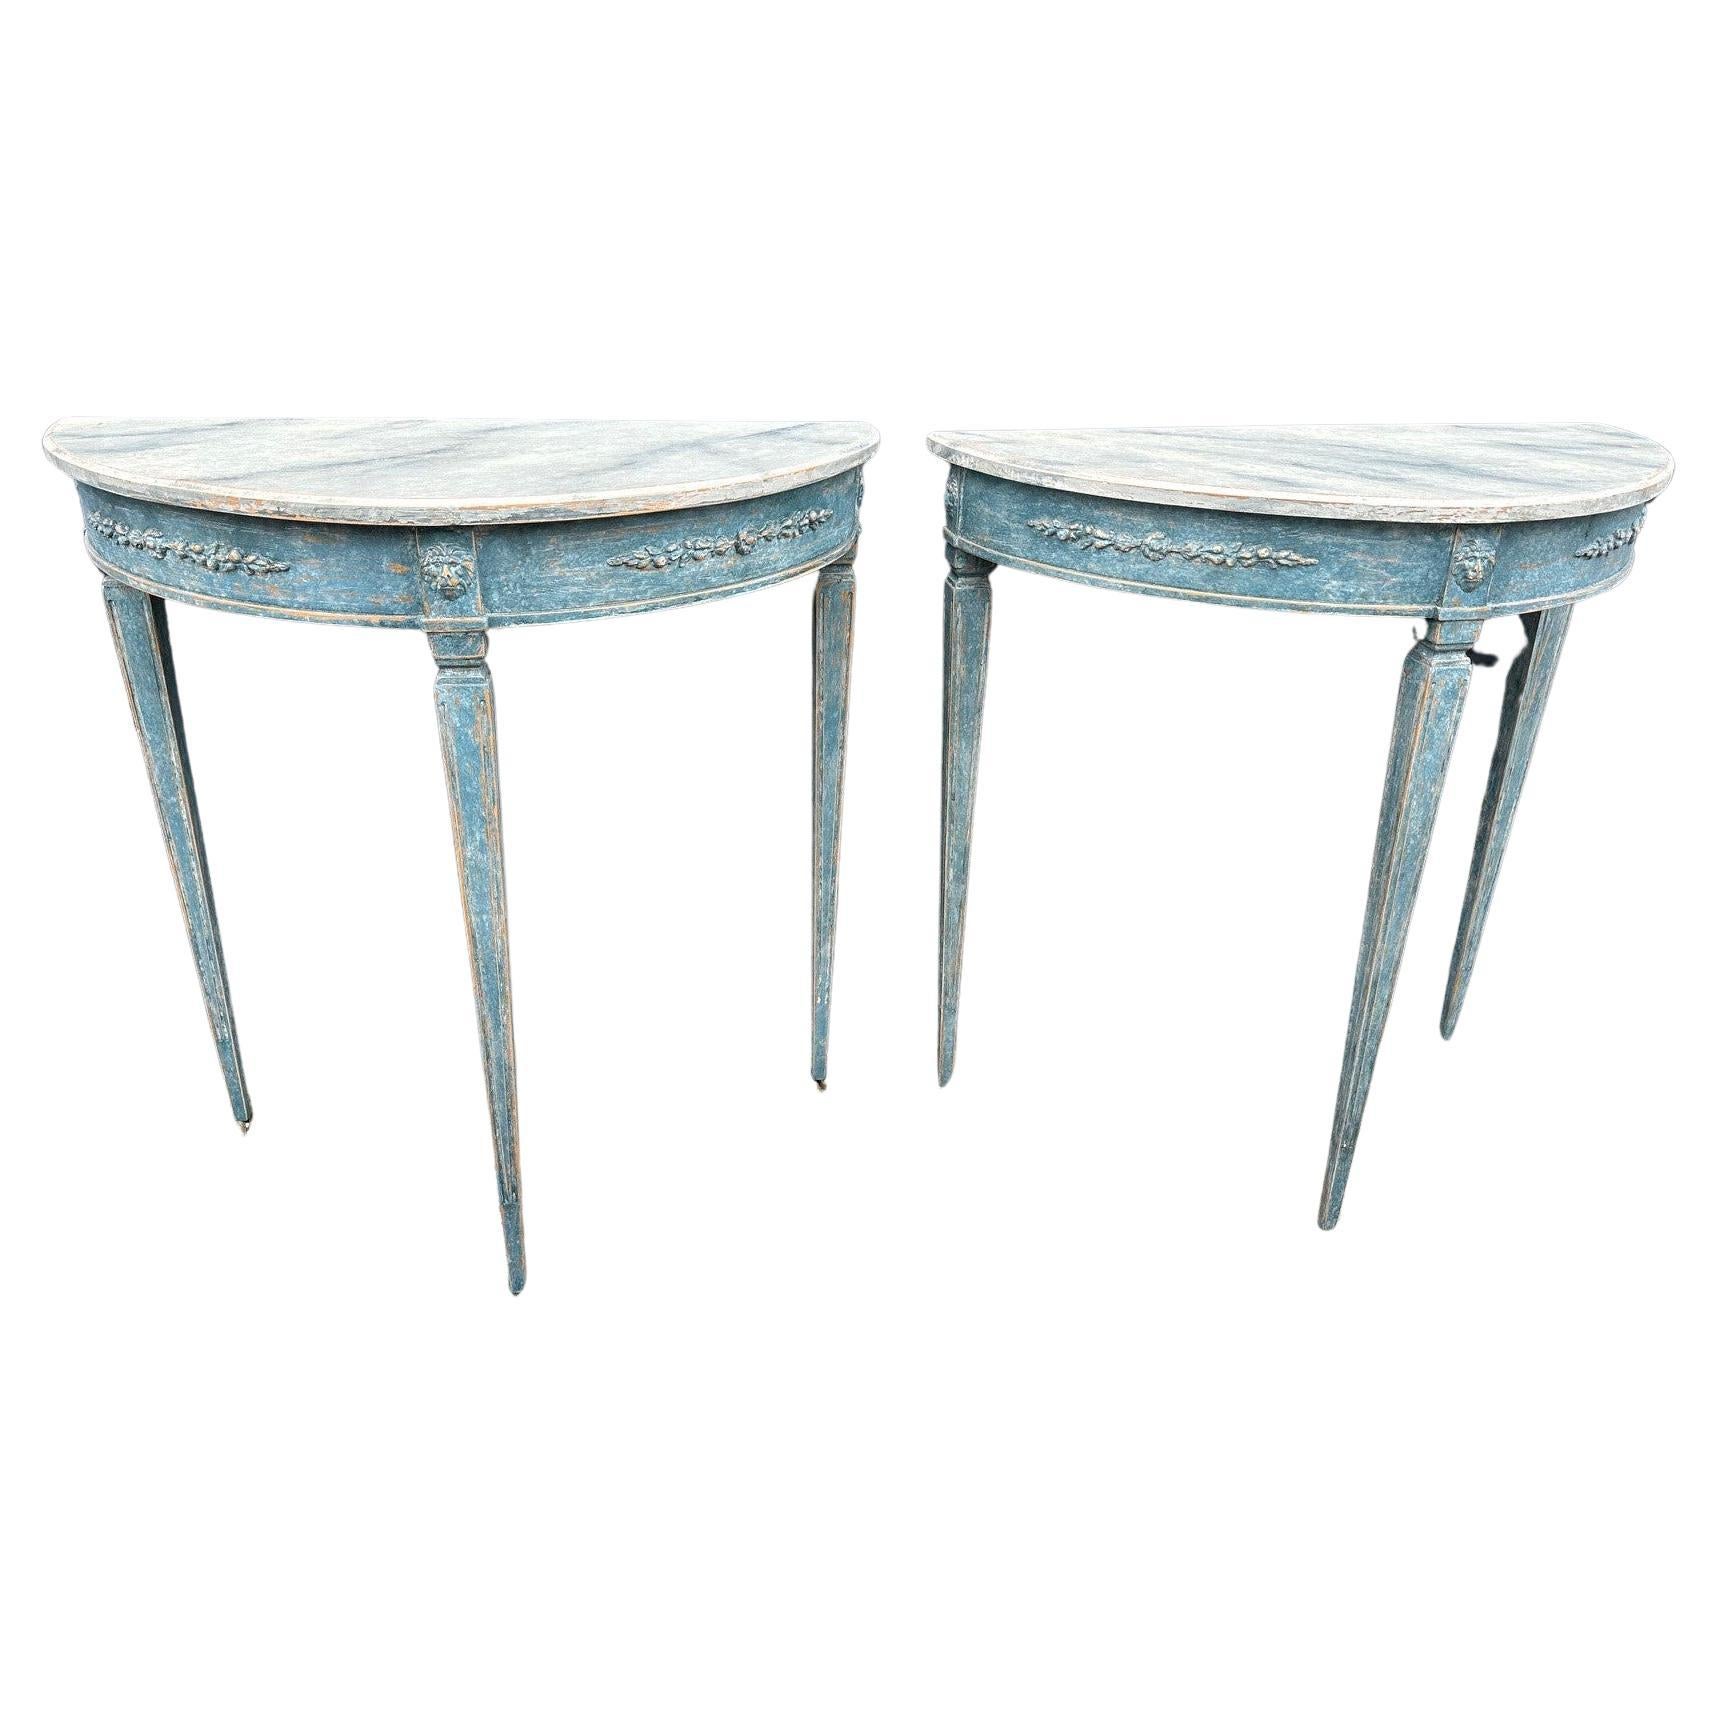 Pair of Gustavian-Style Demilune Console Tables, Sweden Approx. 1900